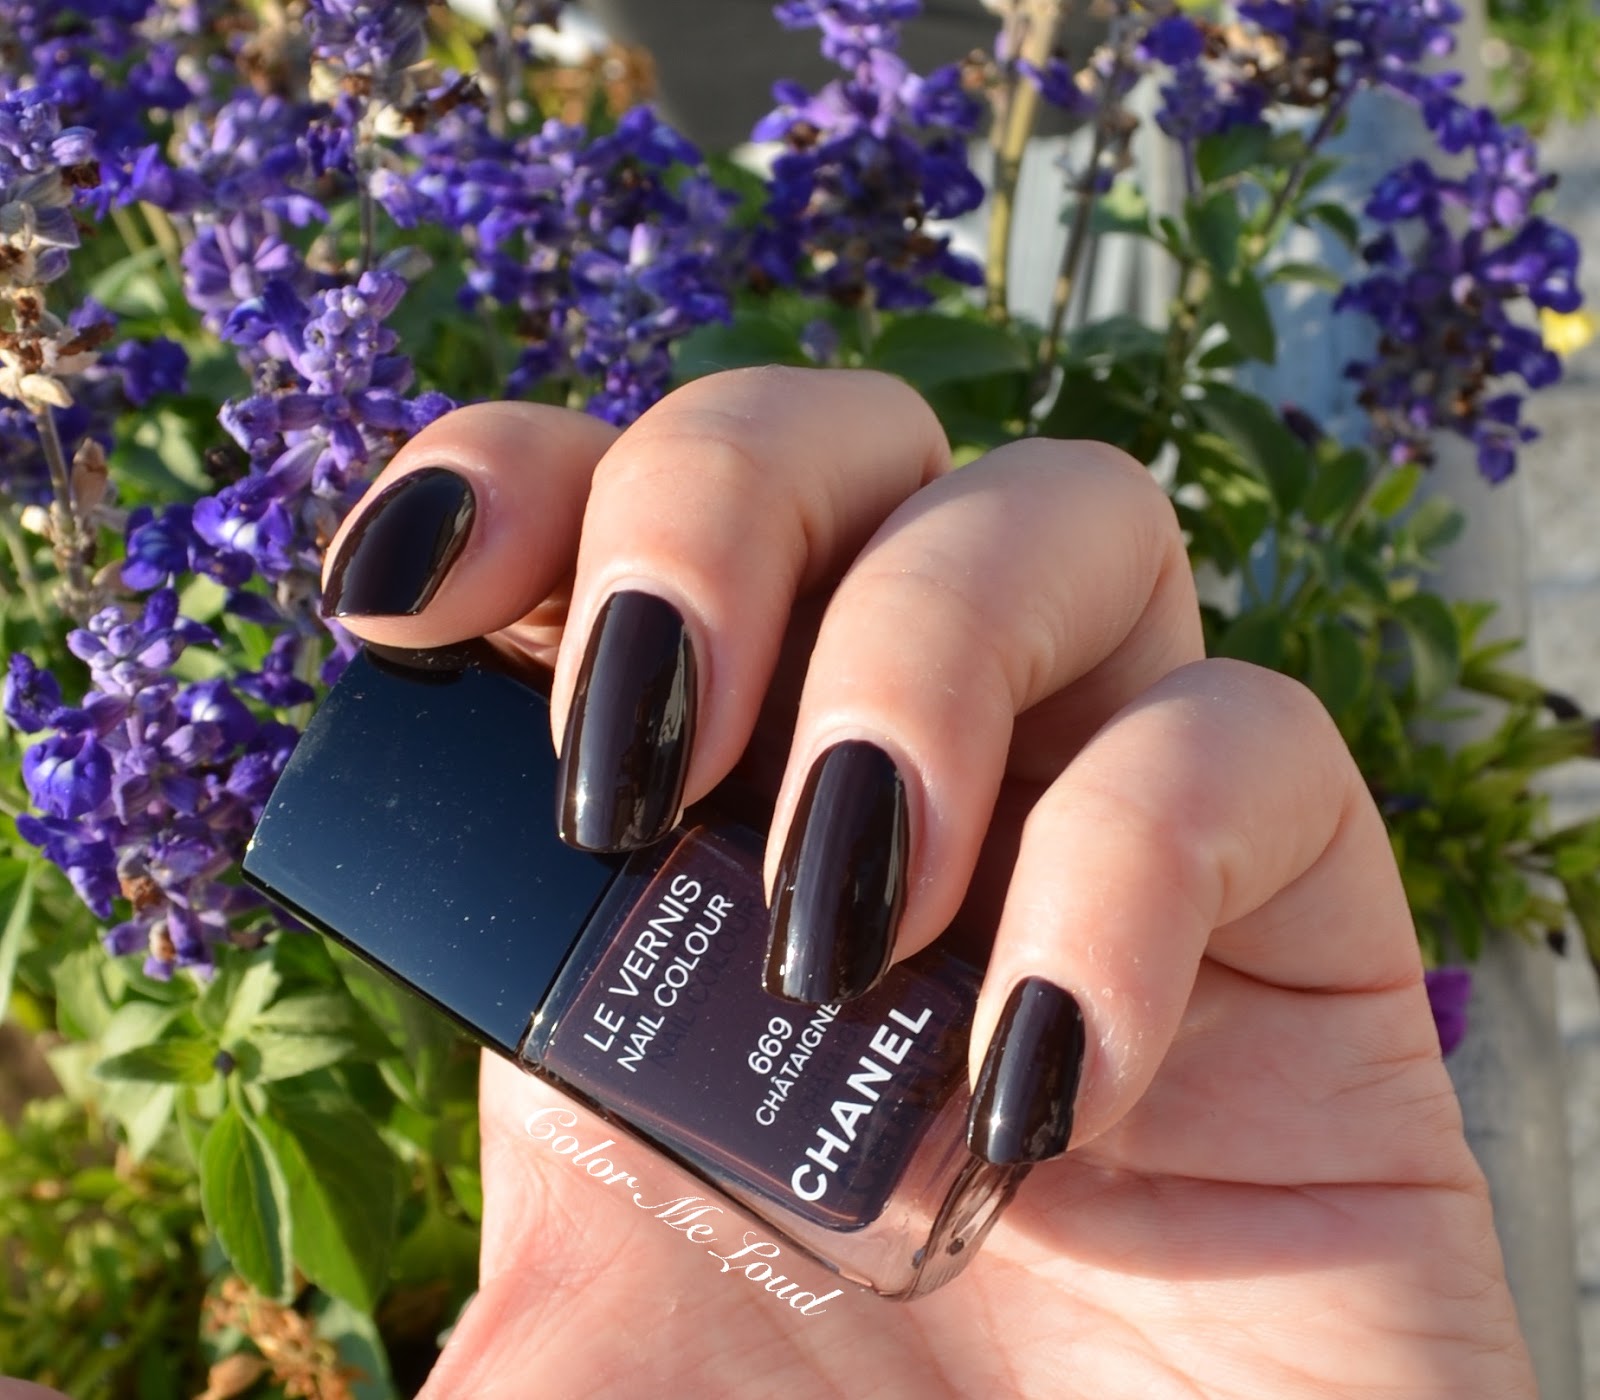 Chanel Le Vernis #669 Chataigne, #671 Ecorce Sanguine, #679 Vert Obscur for  Fall 2015, Swatch, Review & Comparison